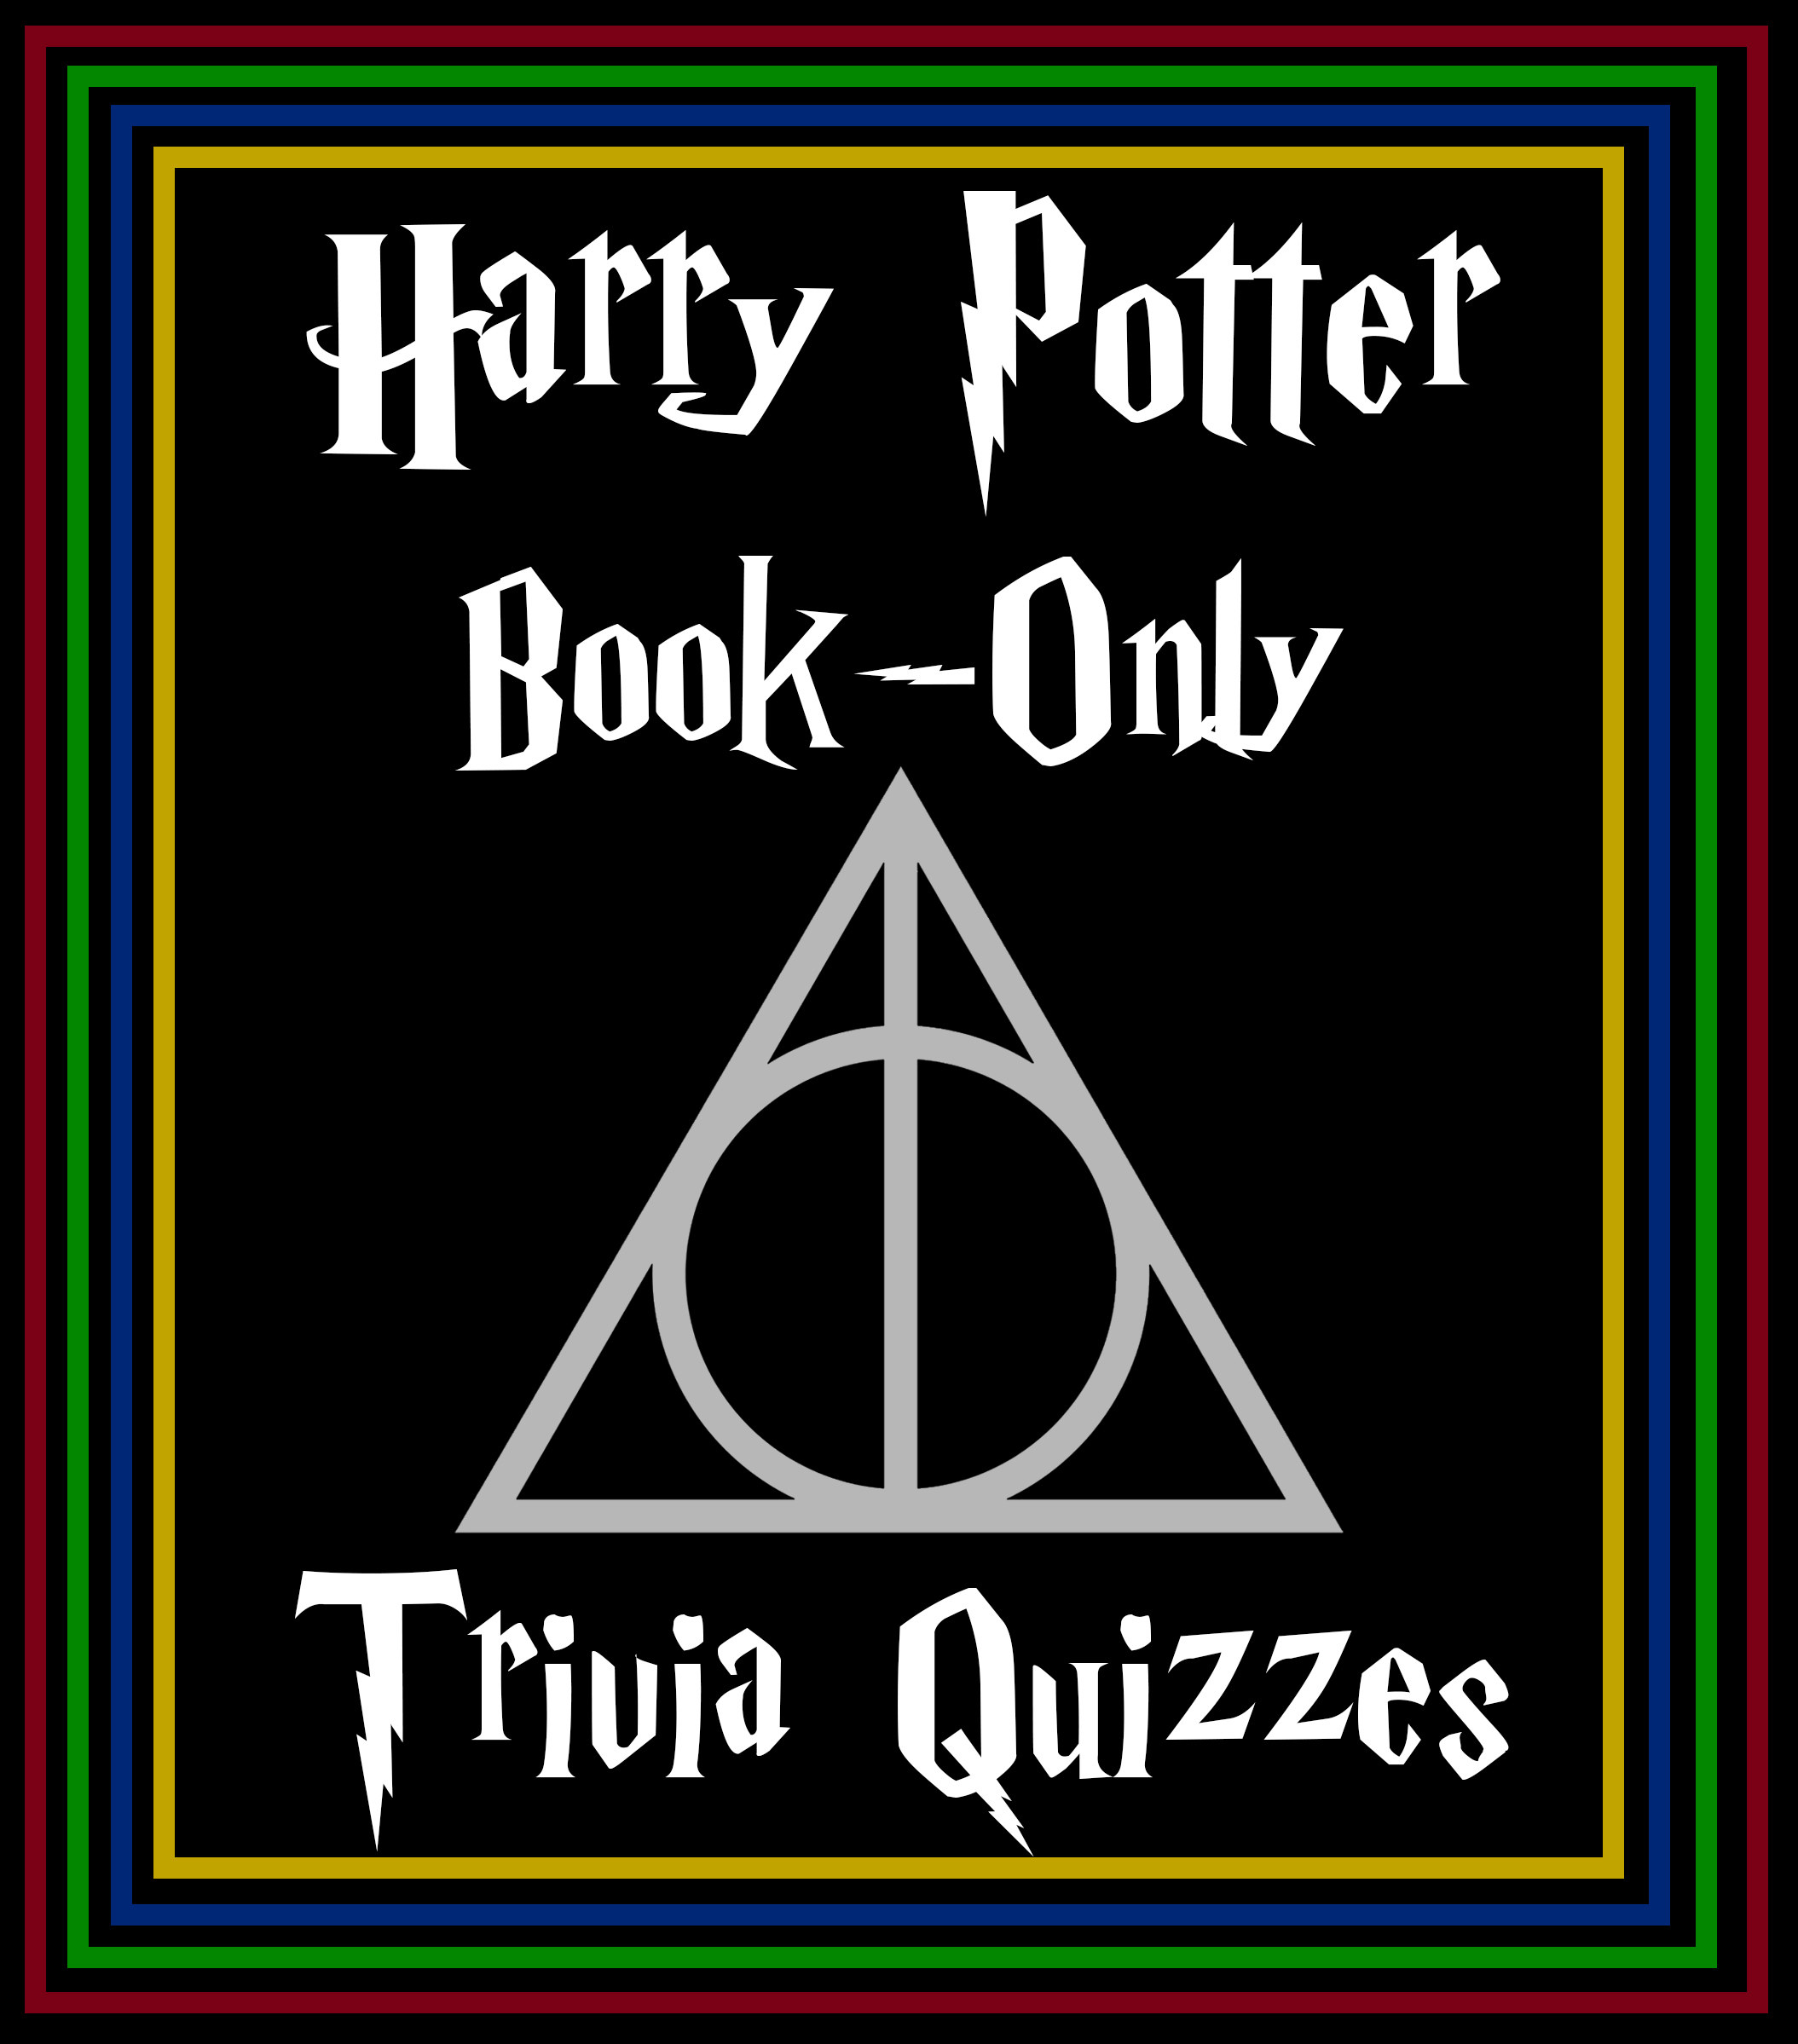 harry potter order of the phoenix ar test answers